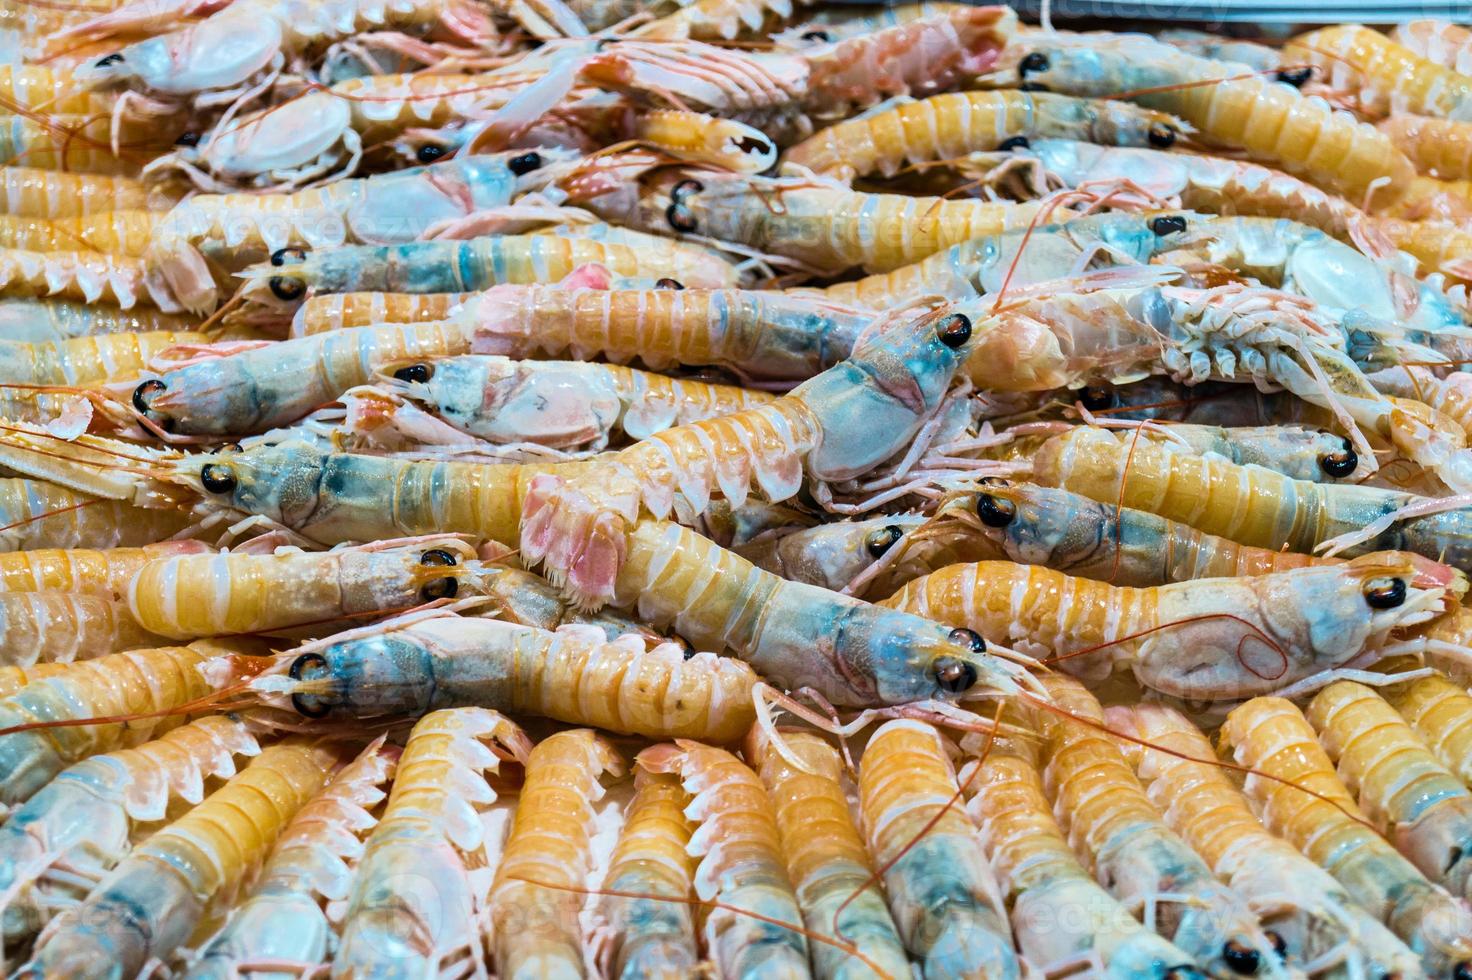 Shrimps and lobster at a Spanish fish market photo